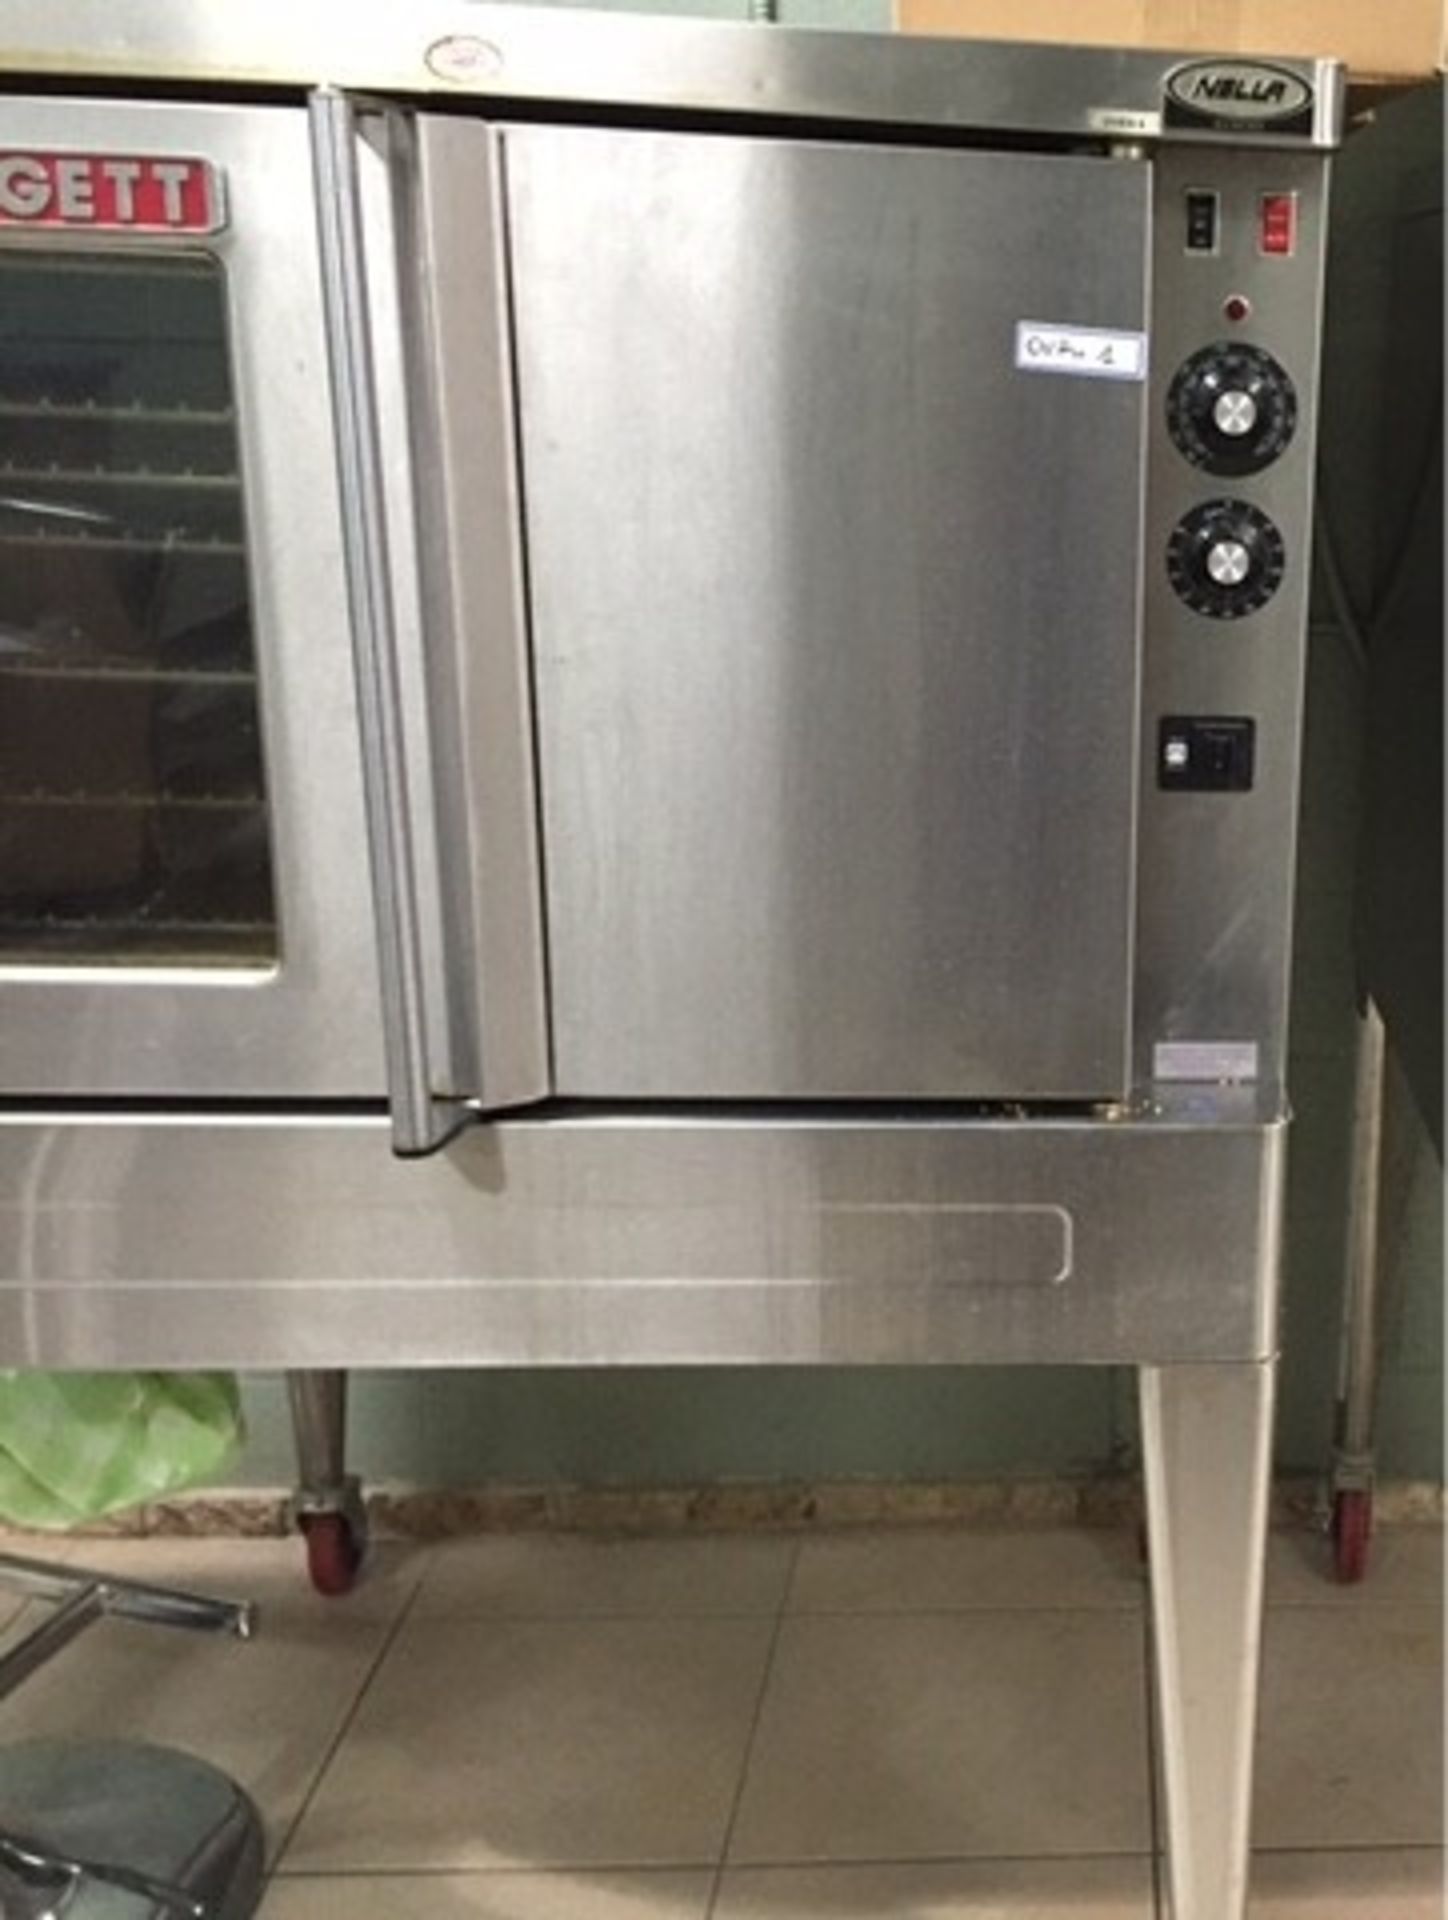 BLODGETT SHOE-E (SP) ELECTRIC CONVECTION OVEN WITH SET OF CASTERS AND EXTRA OVEN RACKS LOAD OUT